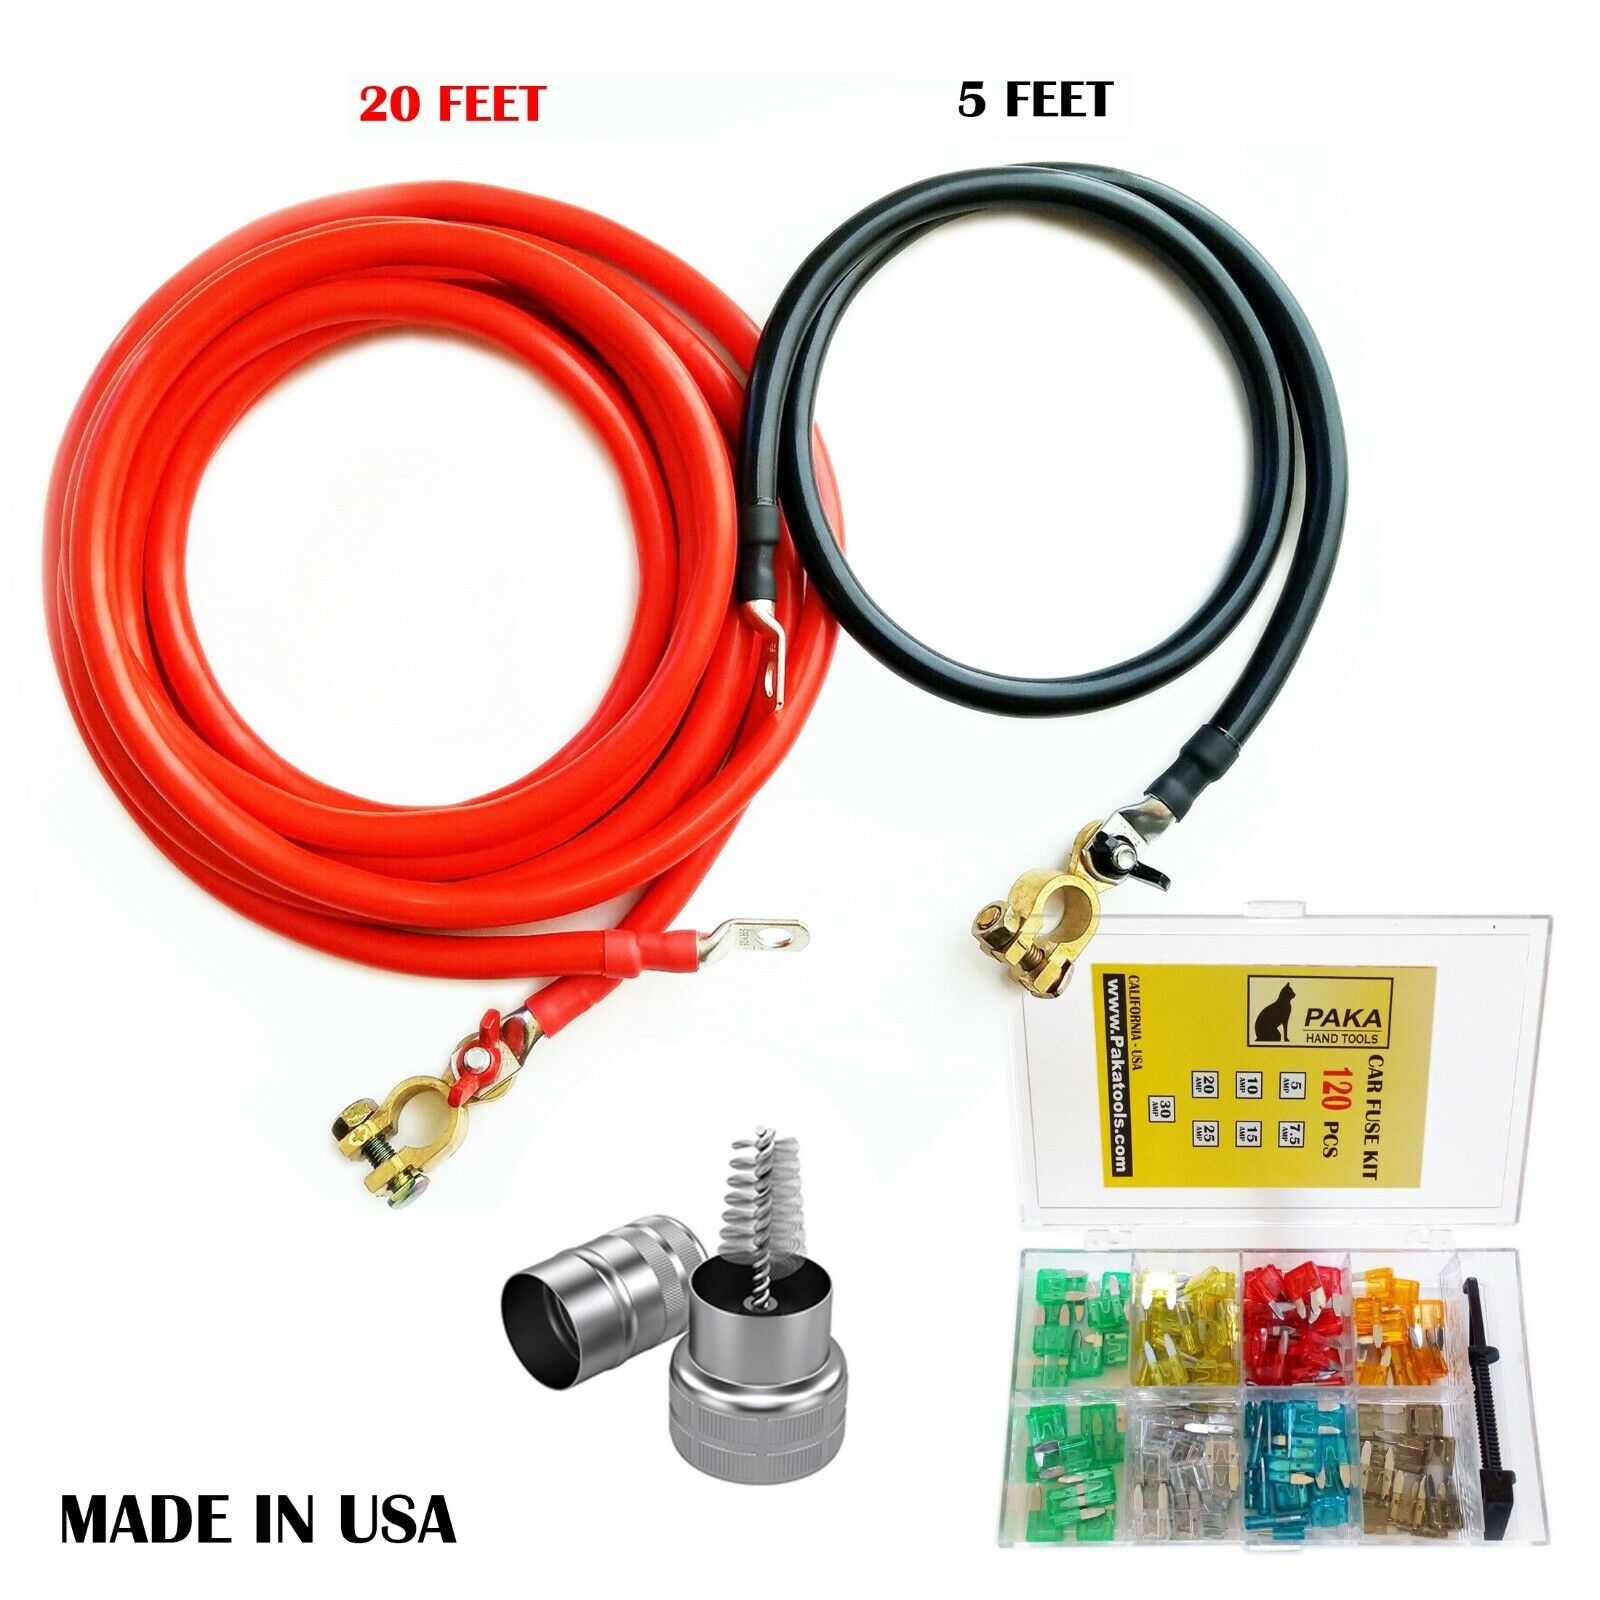 Battery Relocation Kit, 1/0 AWG Cable, Top Post 20 FT / 5 FT + FUSE KIT + BRUSH 